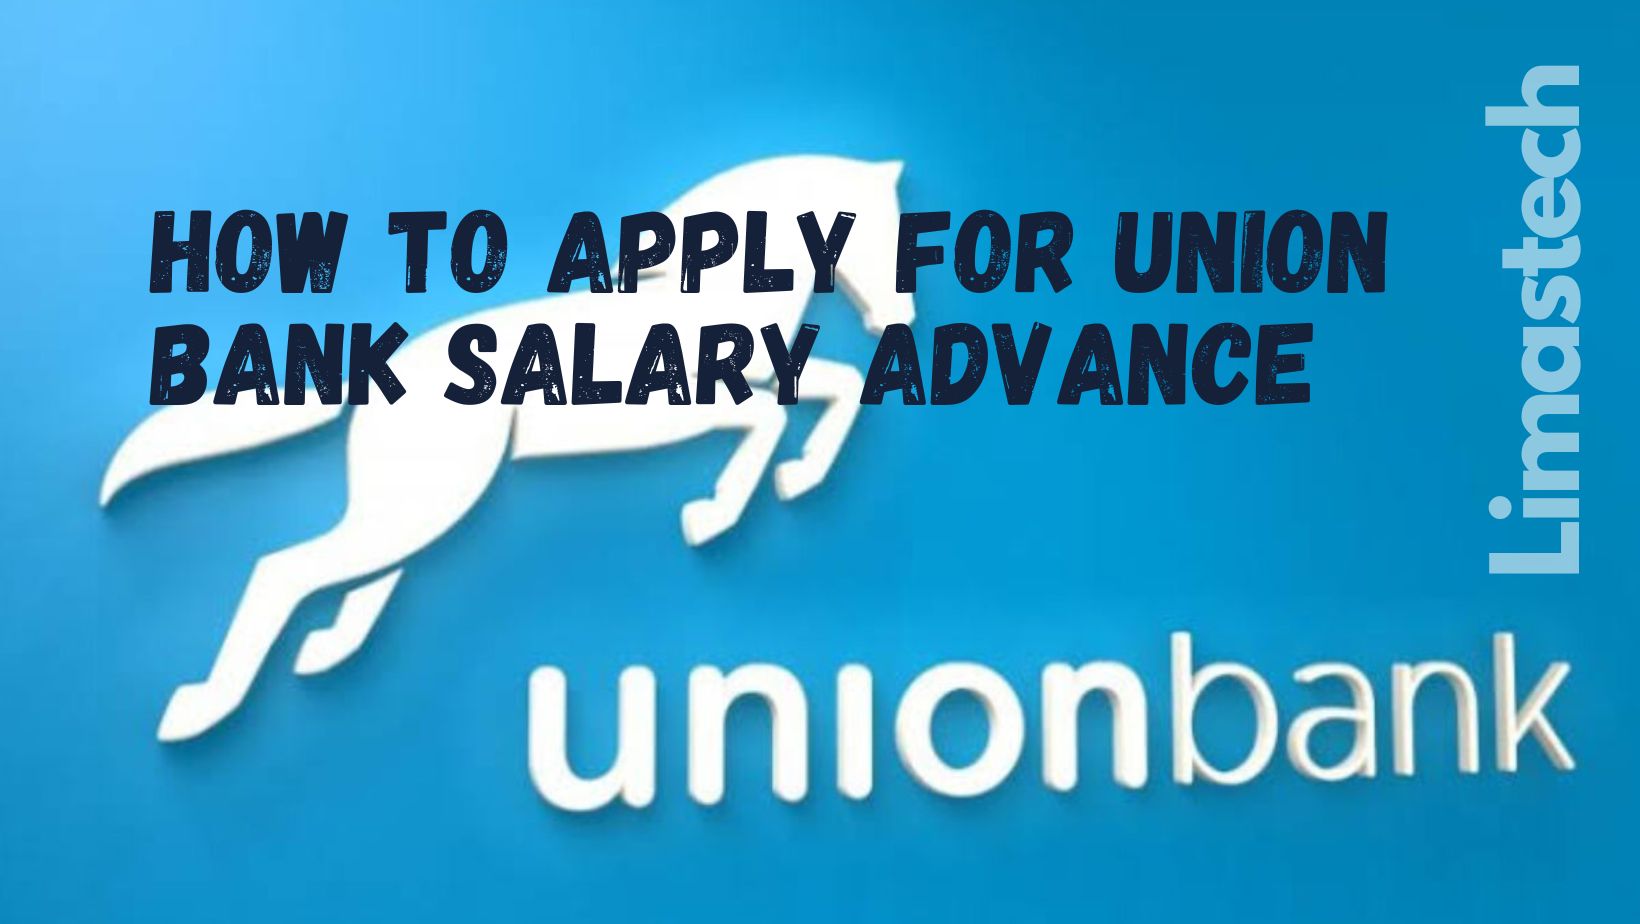 How to Apply For Union Bank Salary Advance